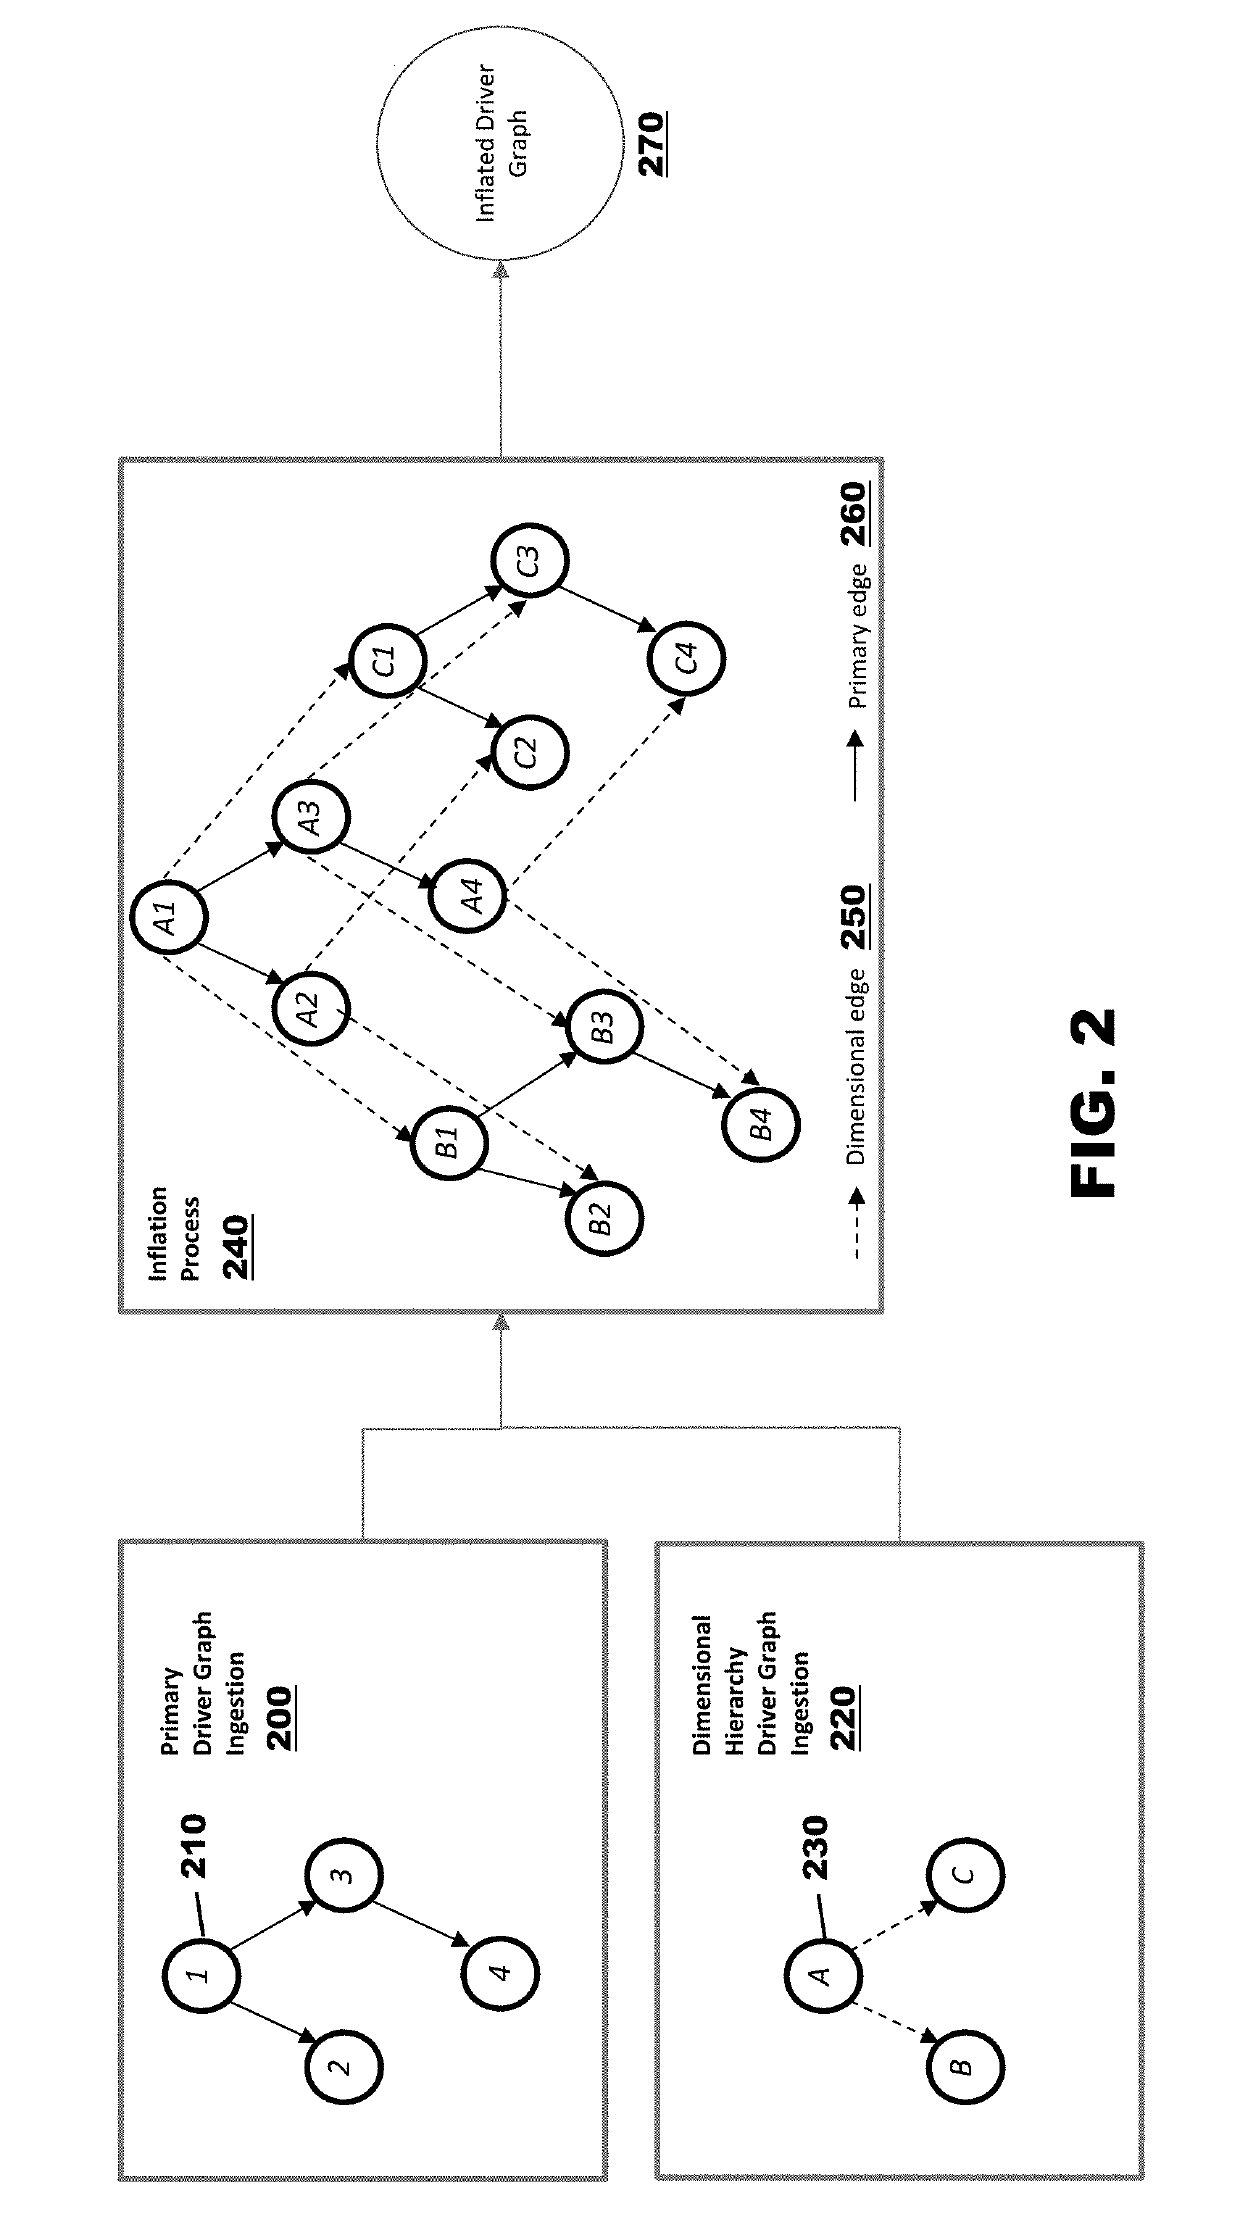 Systems and methods for autonomous data analysis